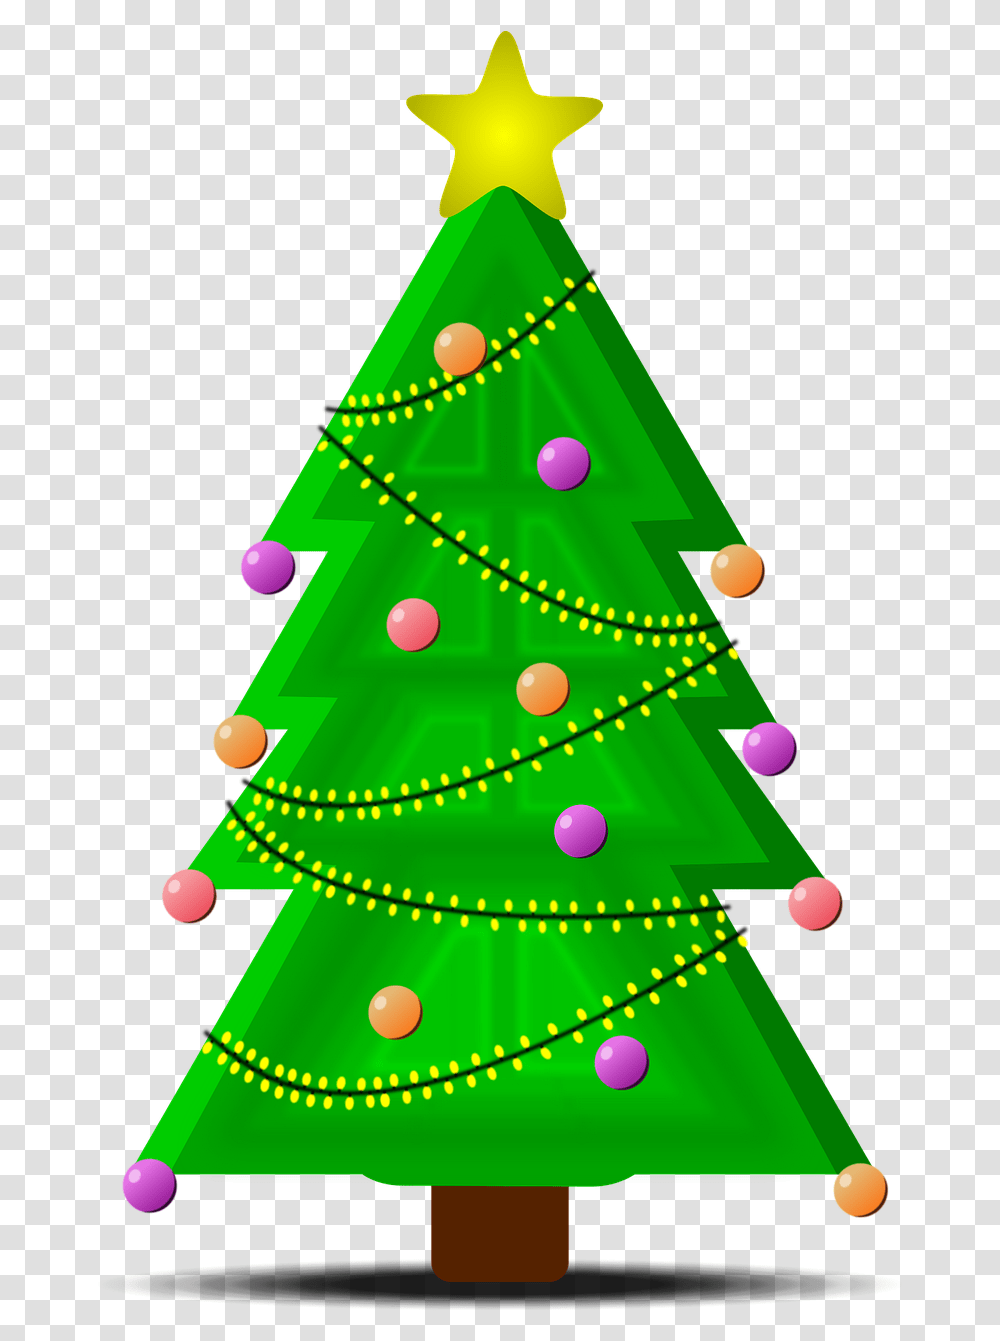 Christmas Tree Rigid Free Vector Graphic On Pixabay, Plant, Ornament, Lighting, Triangle Transparent Png